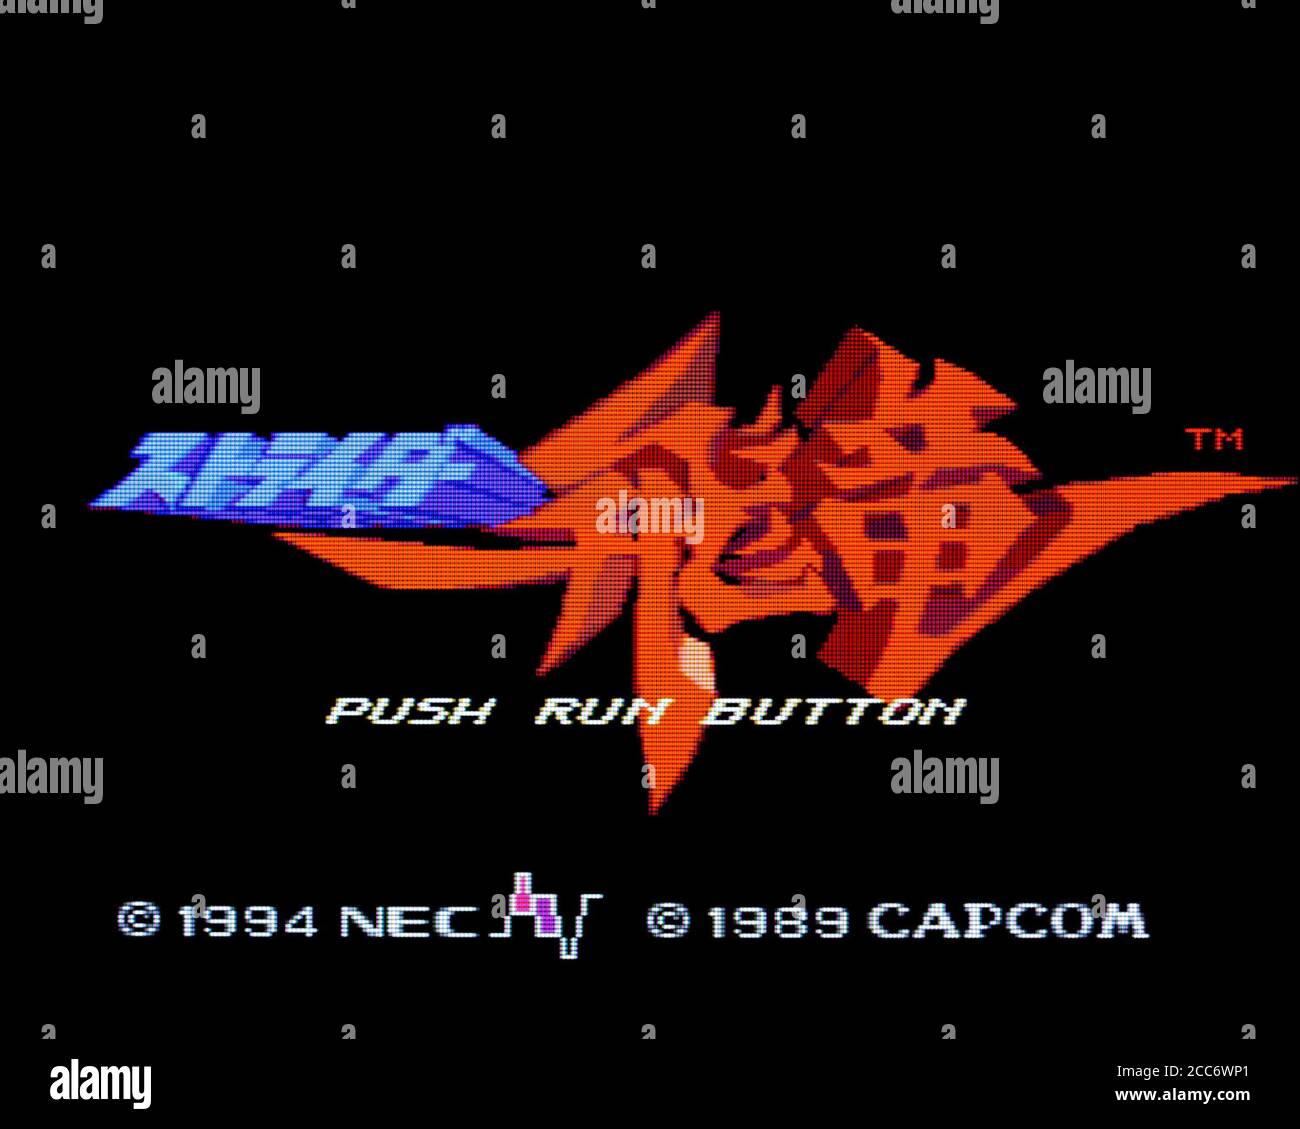 Strider Hiryuu - PC Engine CD Videogame - Editorial use only Stock Photo